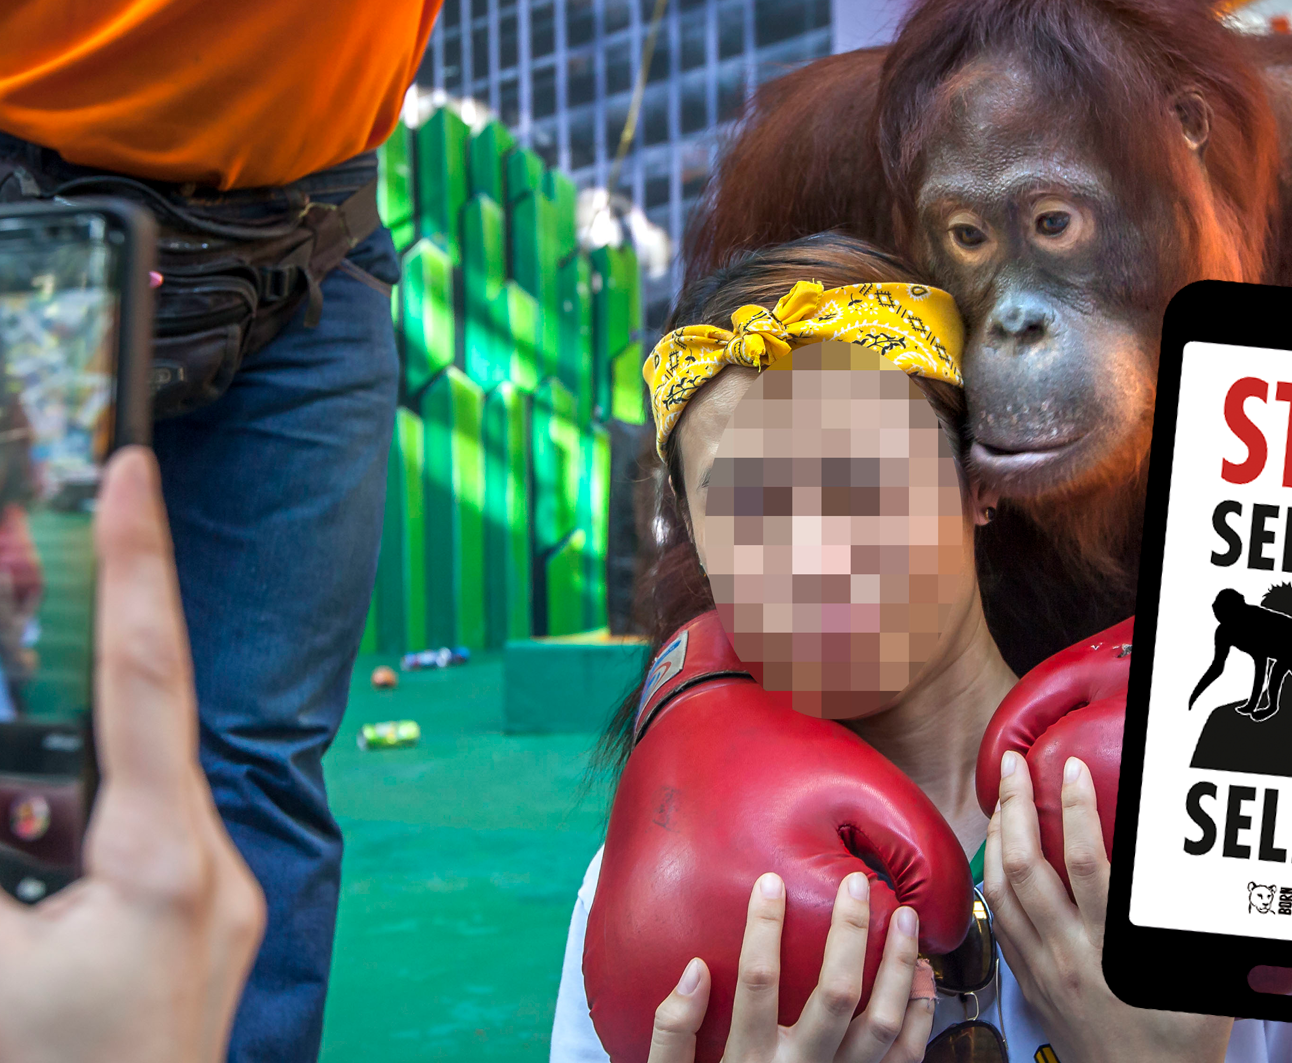 A girl poses for a photo with an orangutan in boxing gloves, with a graphic image of a mobile phone with the 'stop selfish selfies' logo.